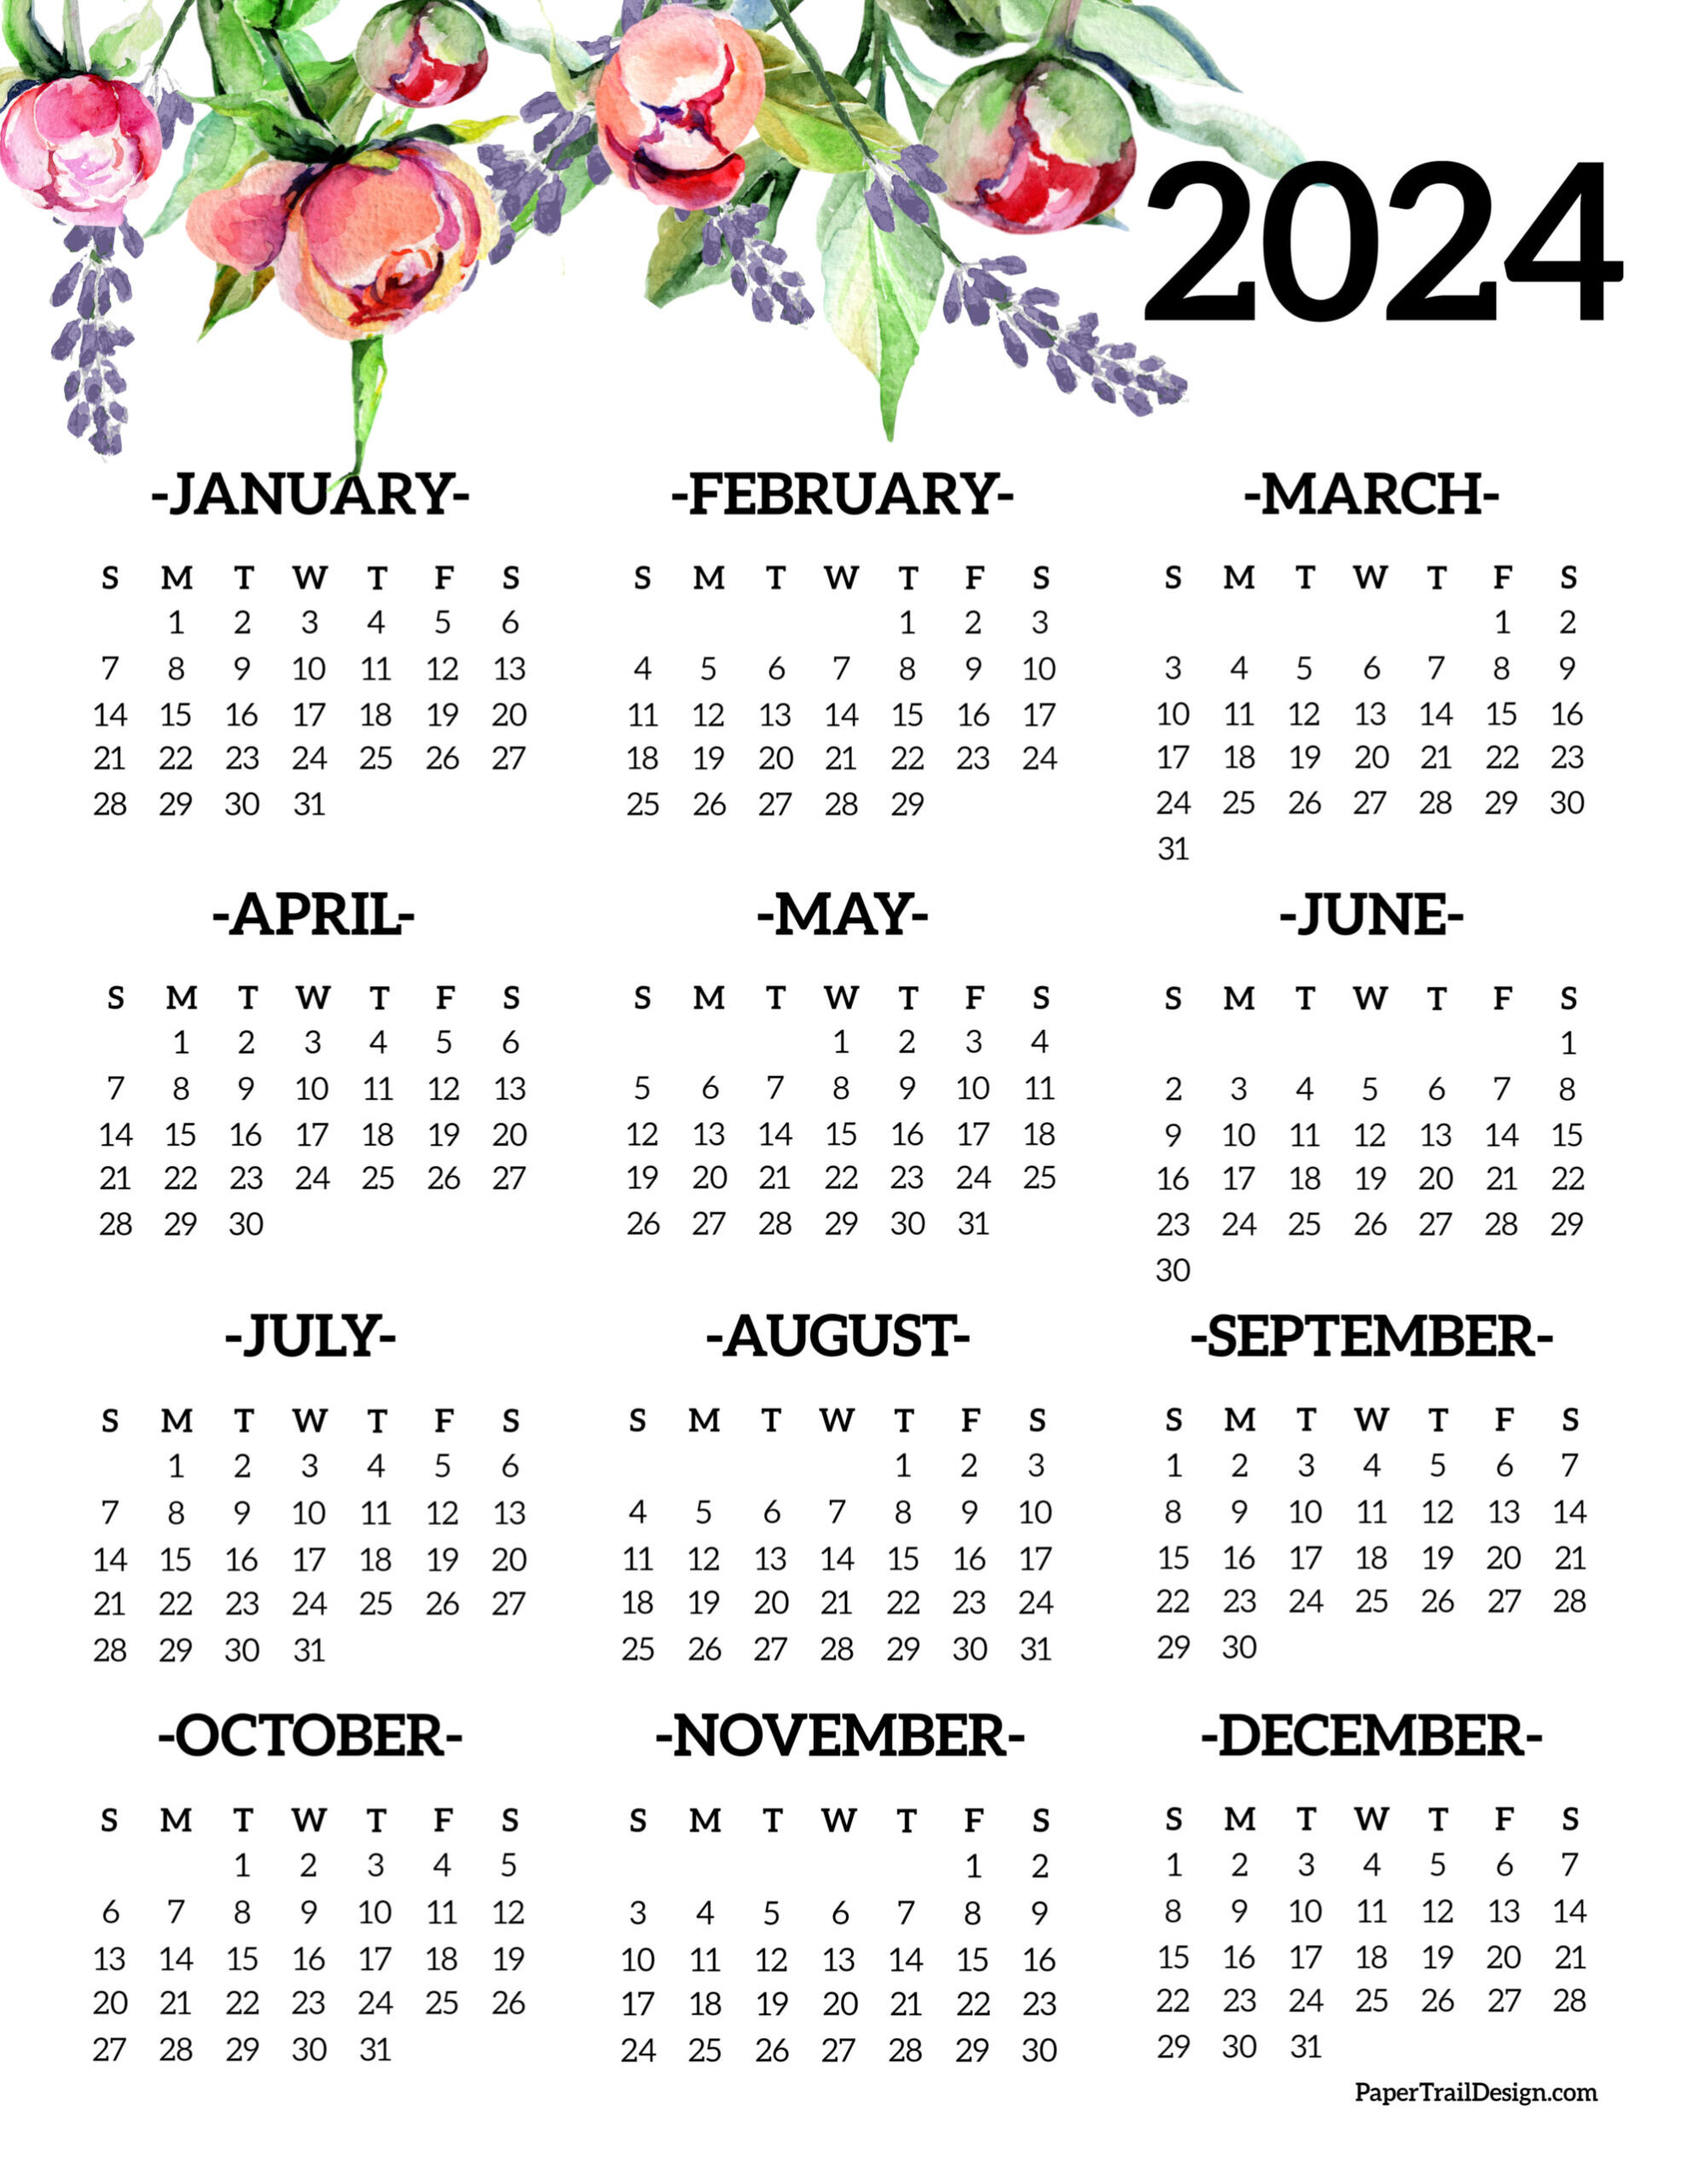 Calendar 2024 Printable One Page - Paper Trail Design for Free Printable Yearly Calendar 2024 One Page